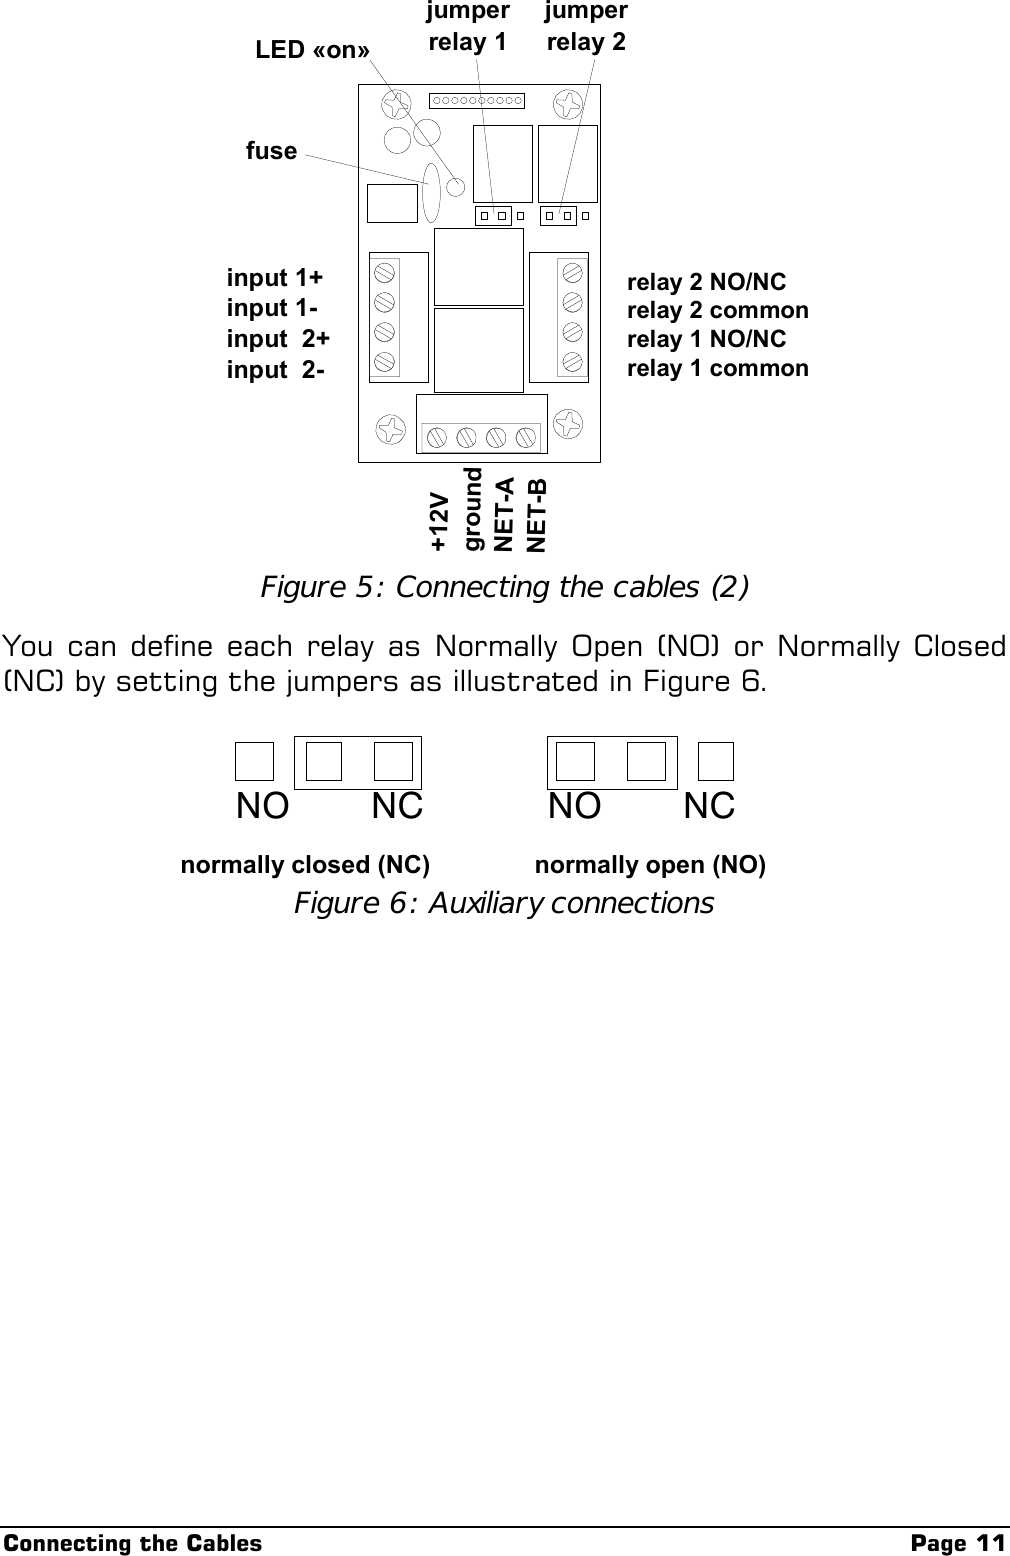 Connecting the Cables Page 11relay 1 commonrelay 1 NO/NCrelay 2 commonrelay 2 NO/NCinput 1+input 1-input  2+input  2-+12VgroundNET-ANET-BLED «on»fusejumper relay 1jumper relay 2Figure 5: Connecting the cables (2)You can define each relay as Normally Open (NO) or Normally Closed(NC) by setting the jumpers as illustrated in Figure 6.NO        NC NO        NCnormally closed (NC) normally open (NO)Figure 6: Auxiliary connections